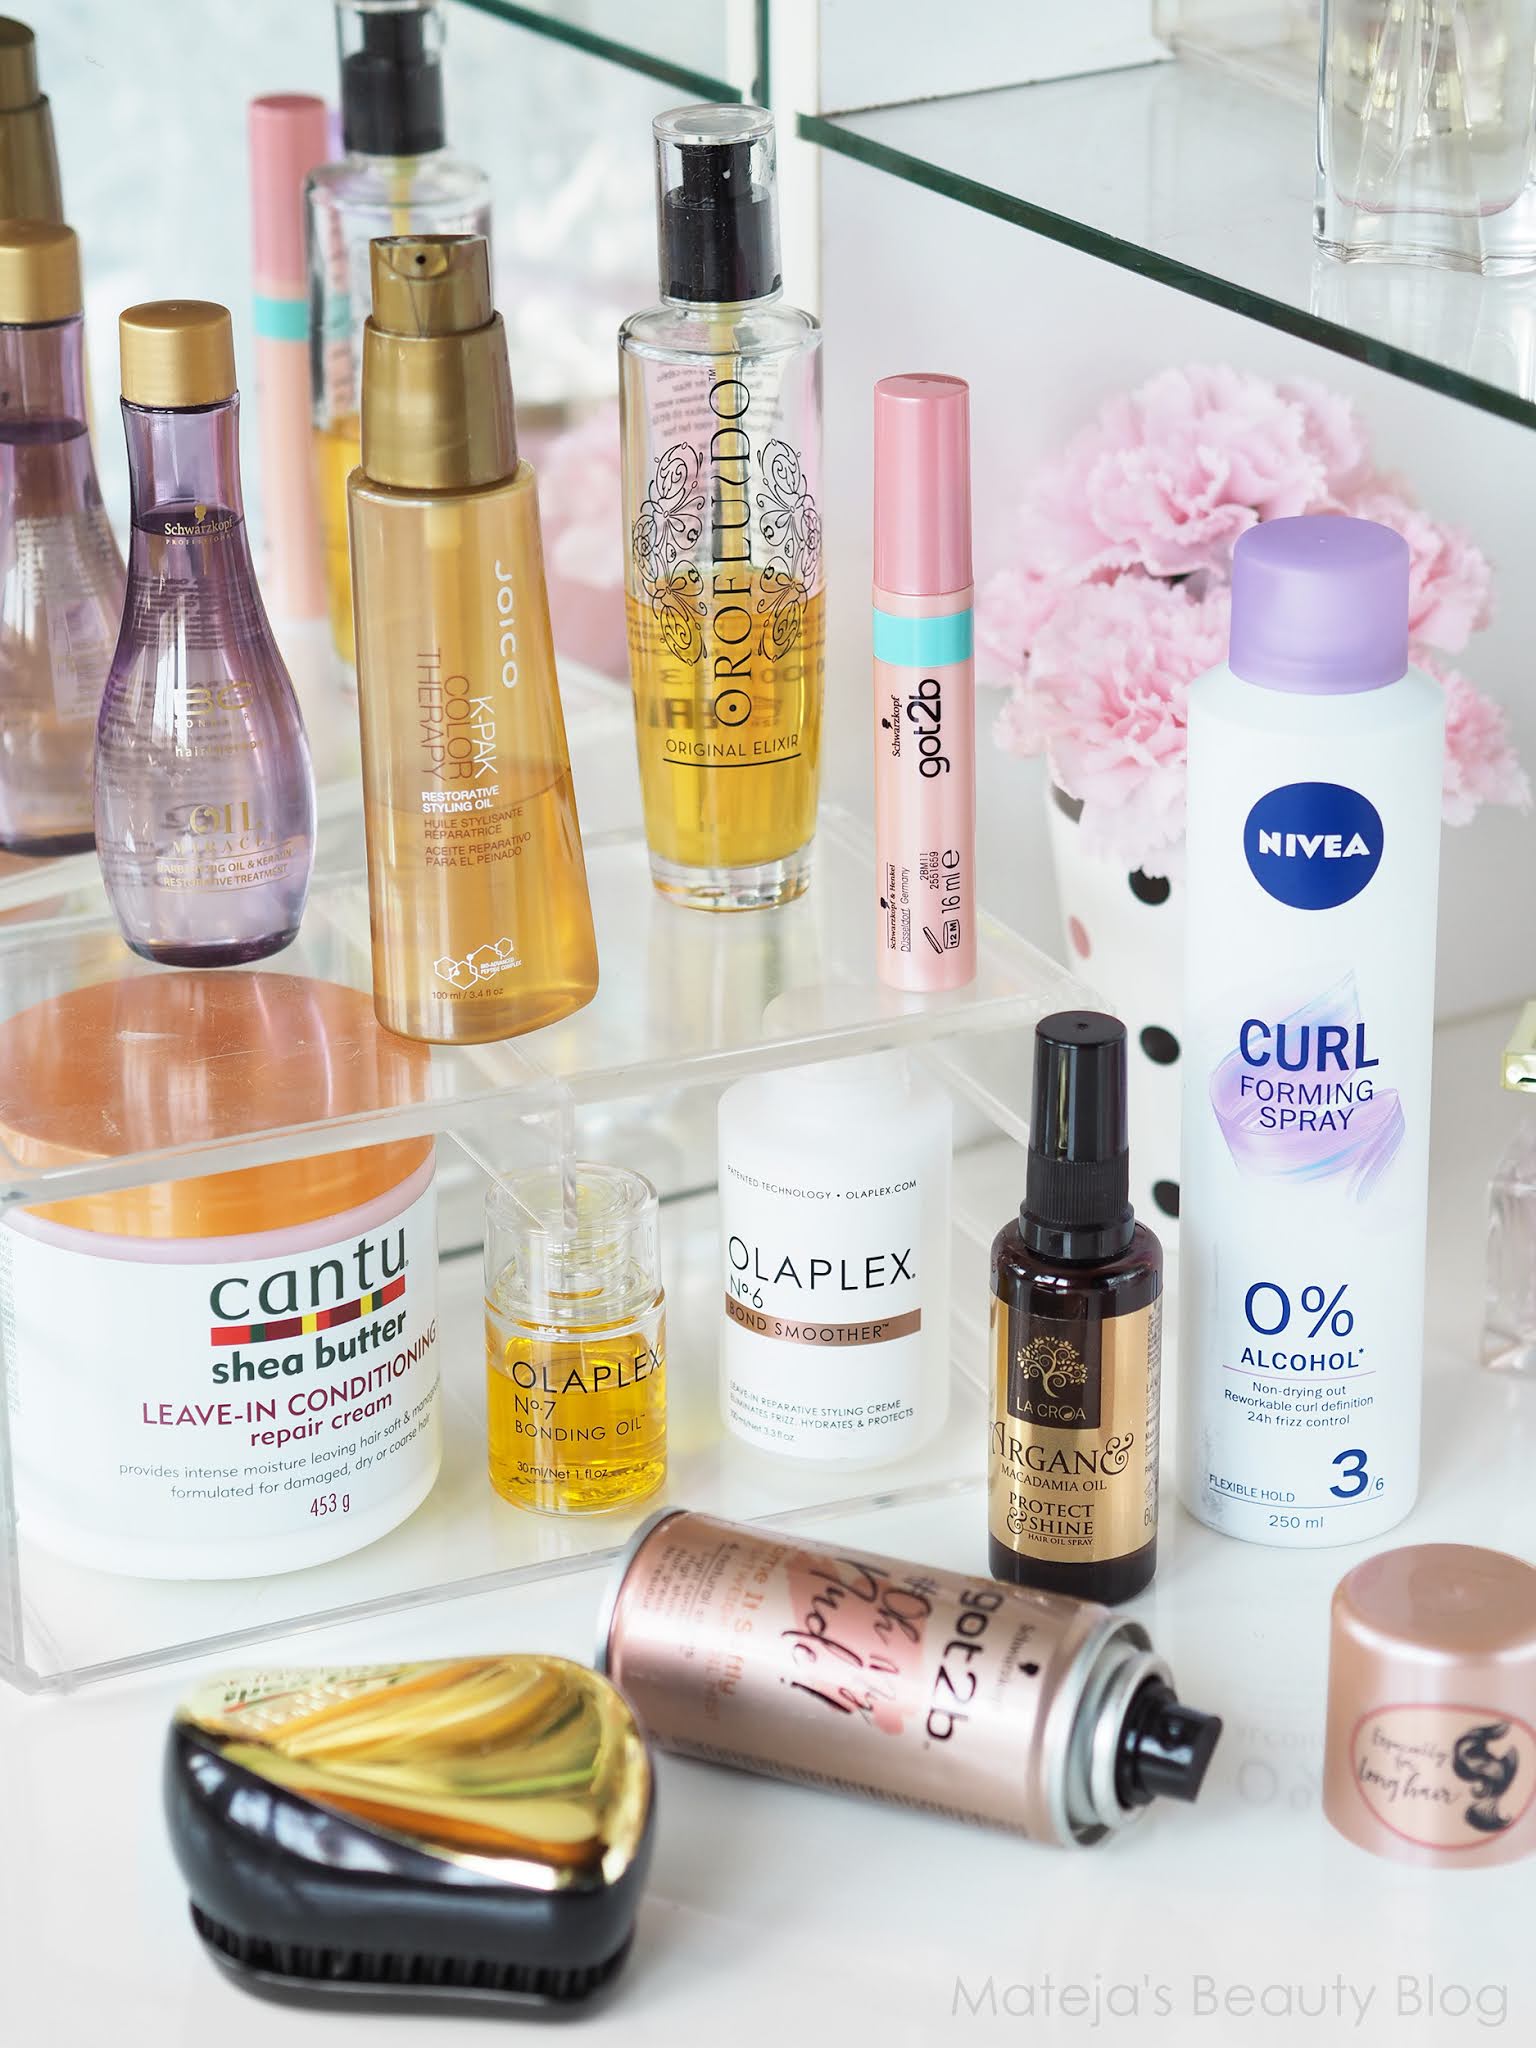 Current Hair Care Part 2: Leave-ins, Oils & Styling (2020)